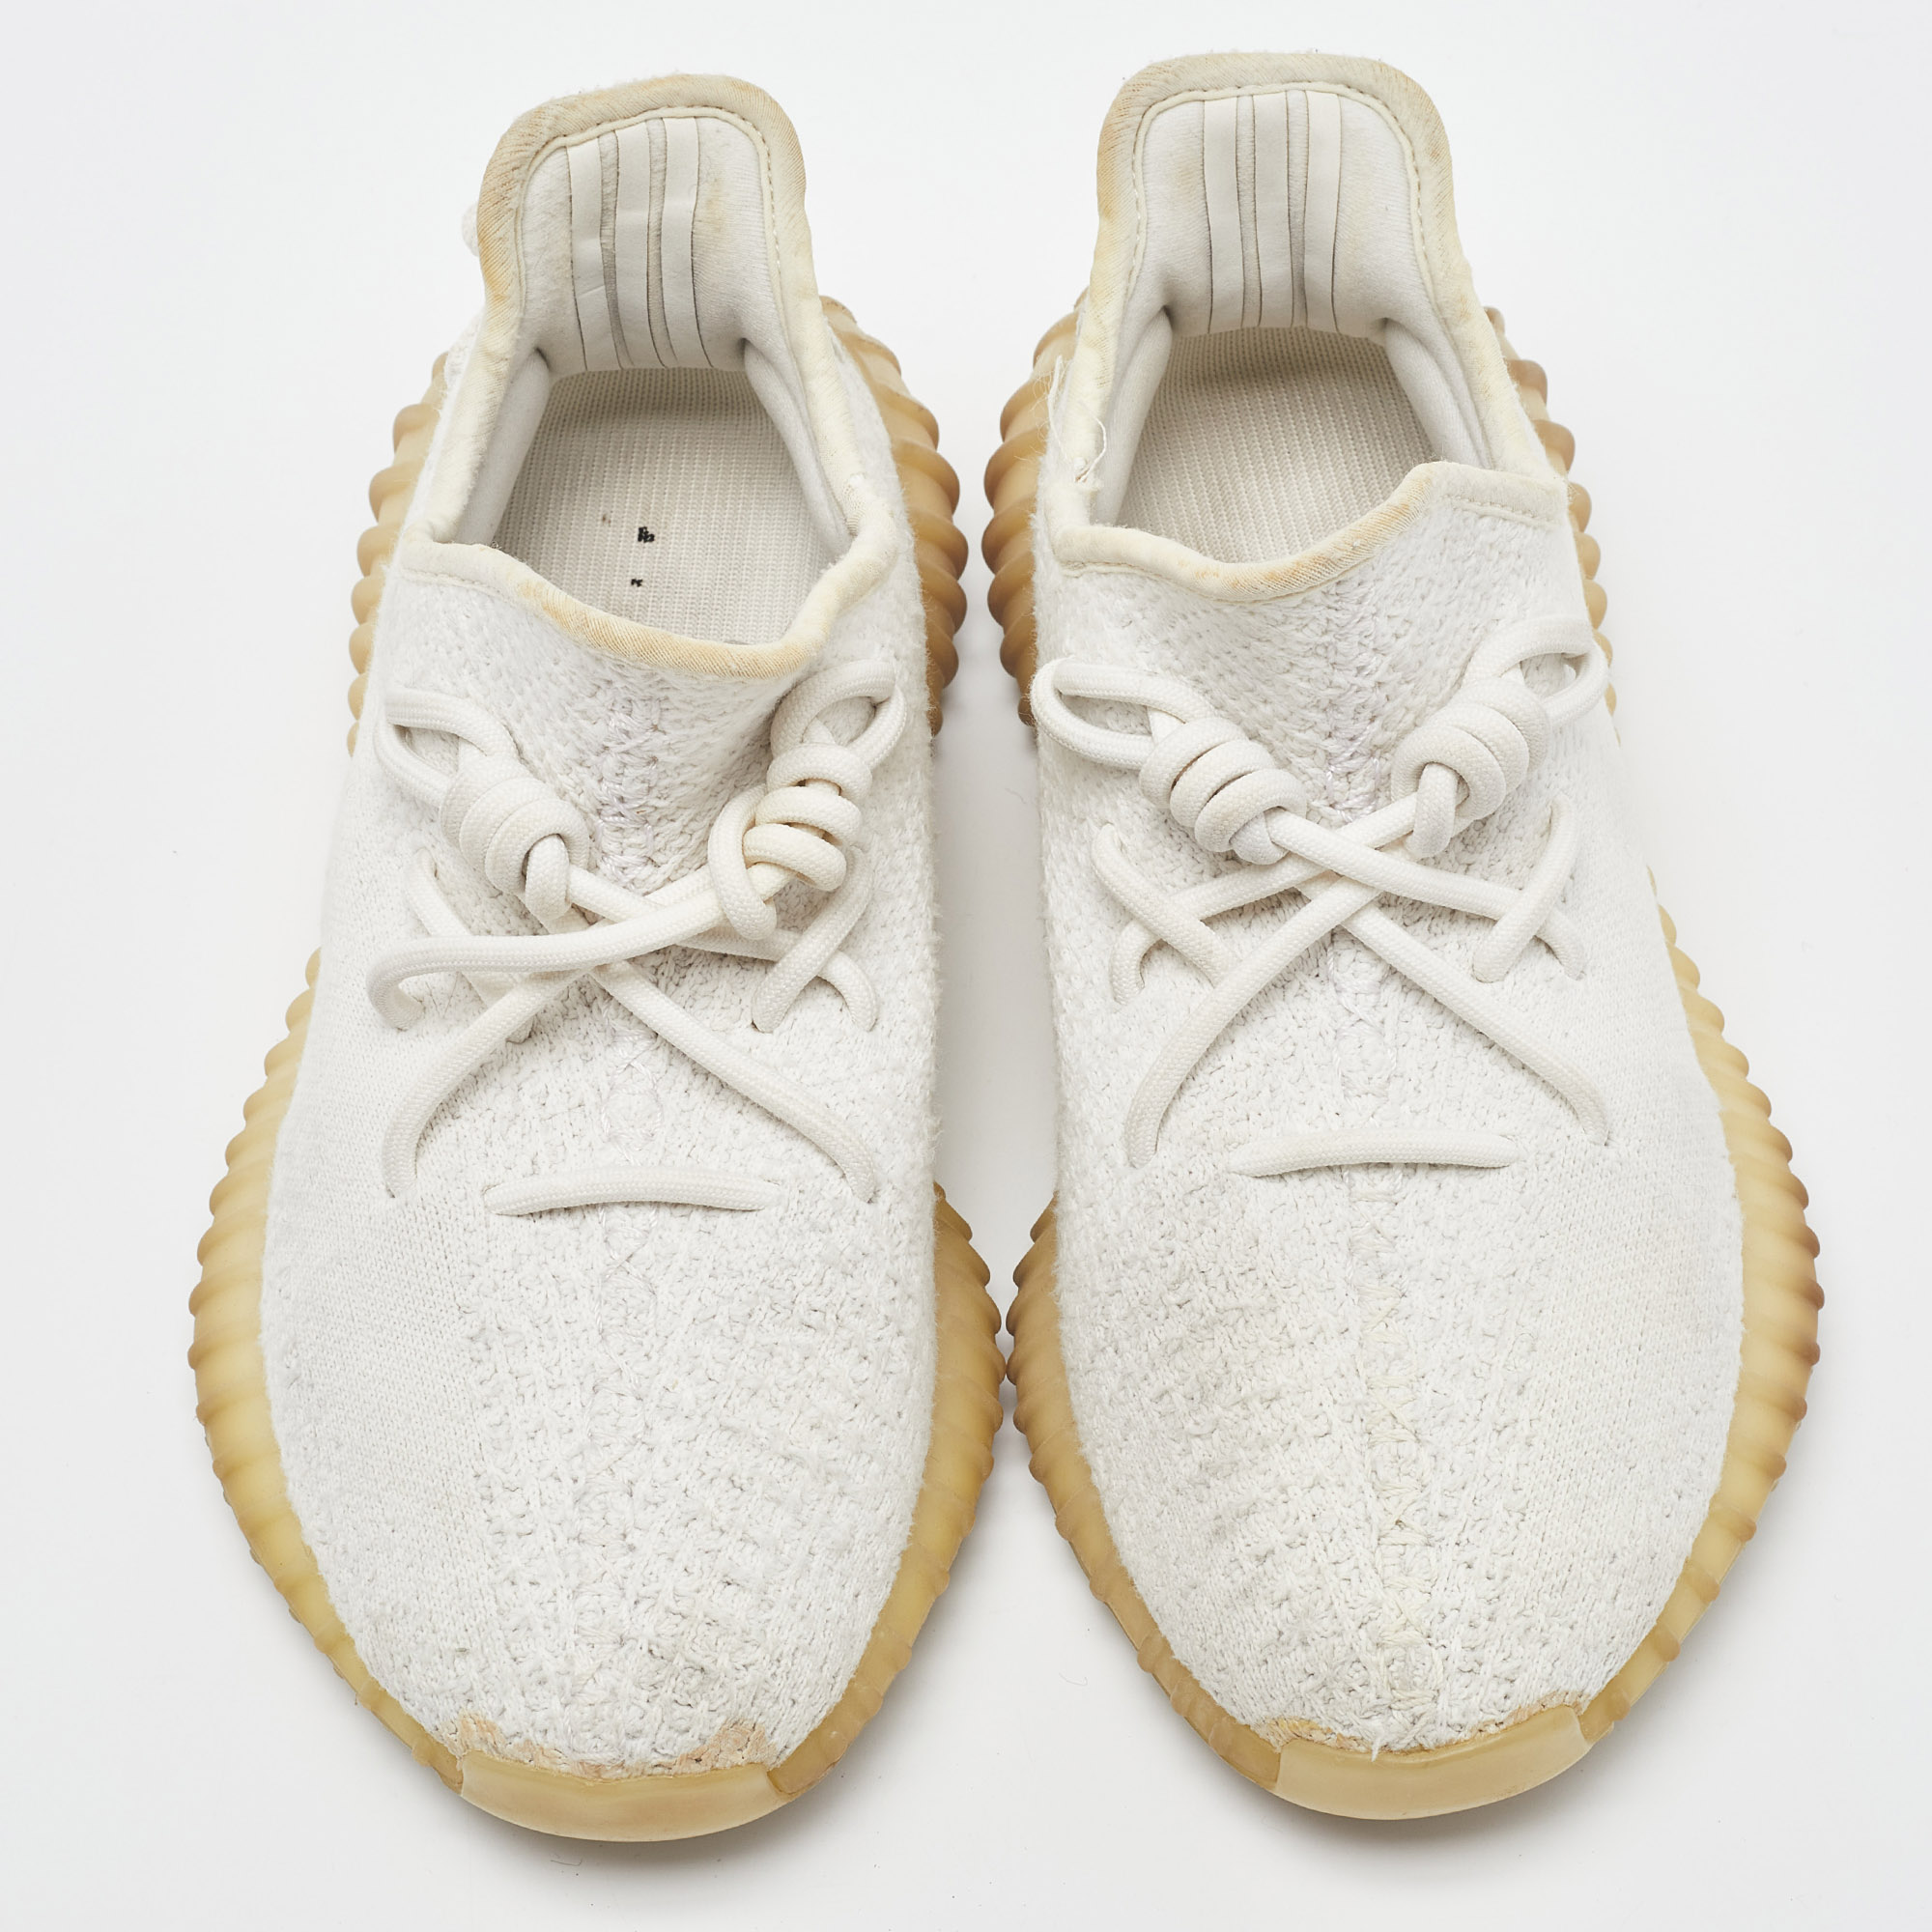 Yeezy X Adidas Cream Knit Fabric Boost 350 V2 Cream Sneakers Size 38 2/3